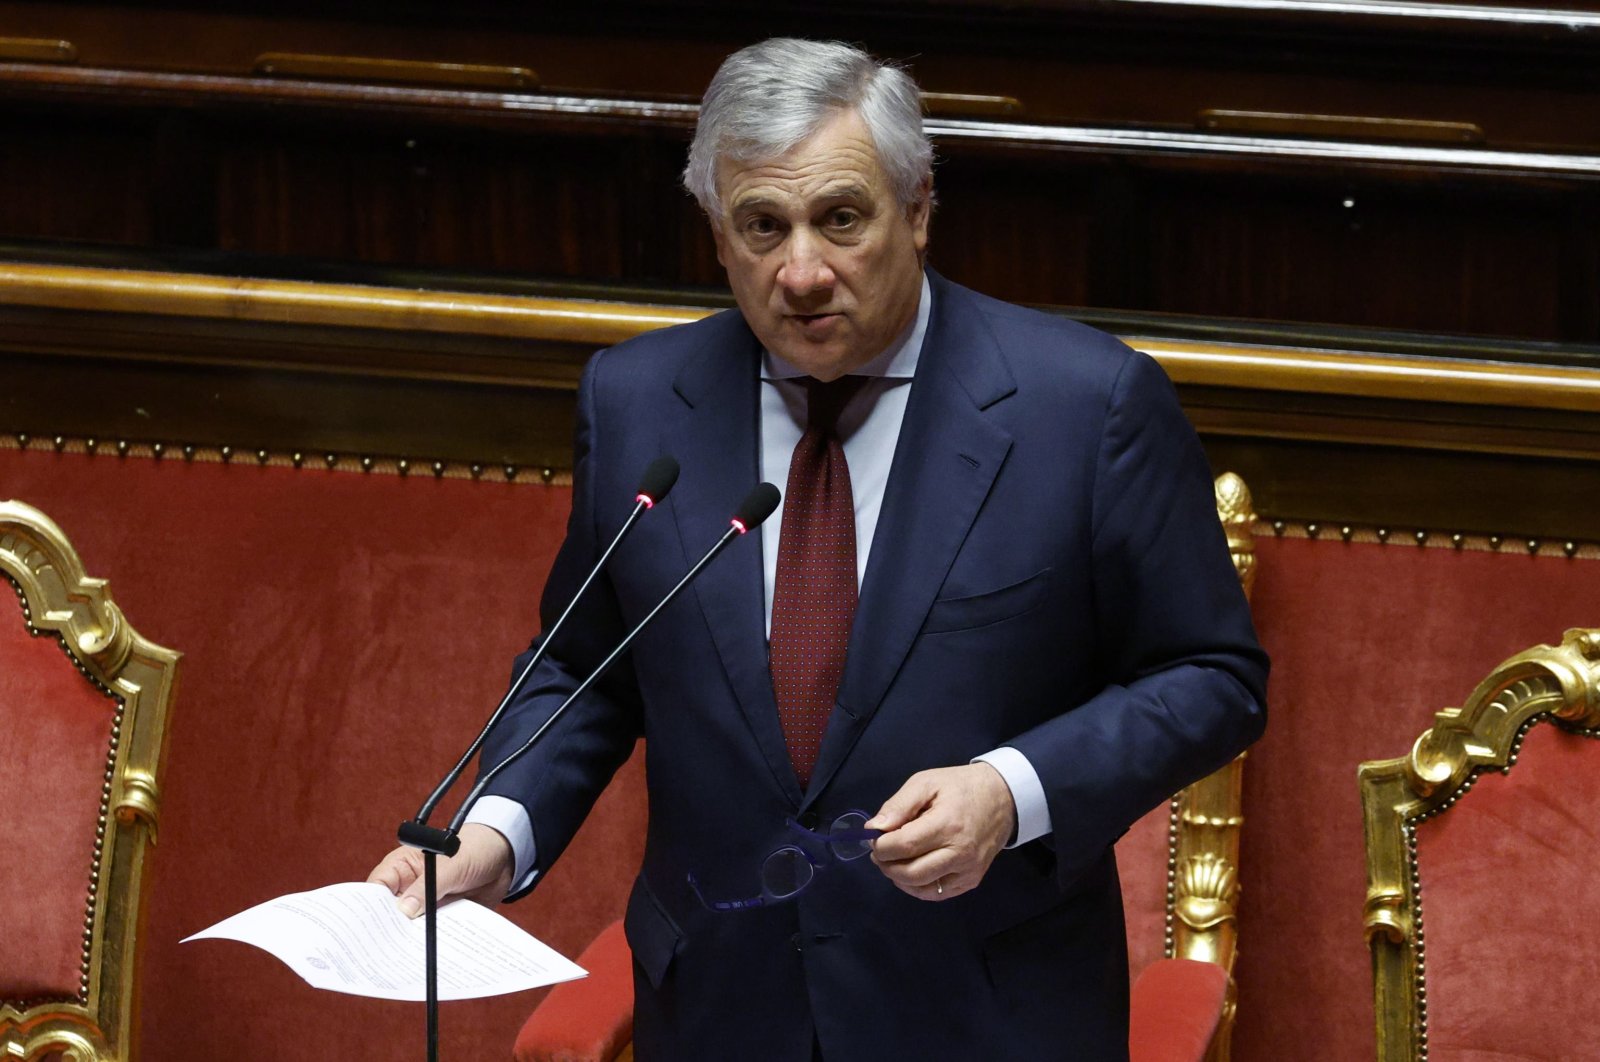 Italian Foreign Minister and Deputy Prime Minister Antonio Tajani speaks during a question session at the Senate, in Rome, Italy, Jan. 12, 2023. (EPA)